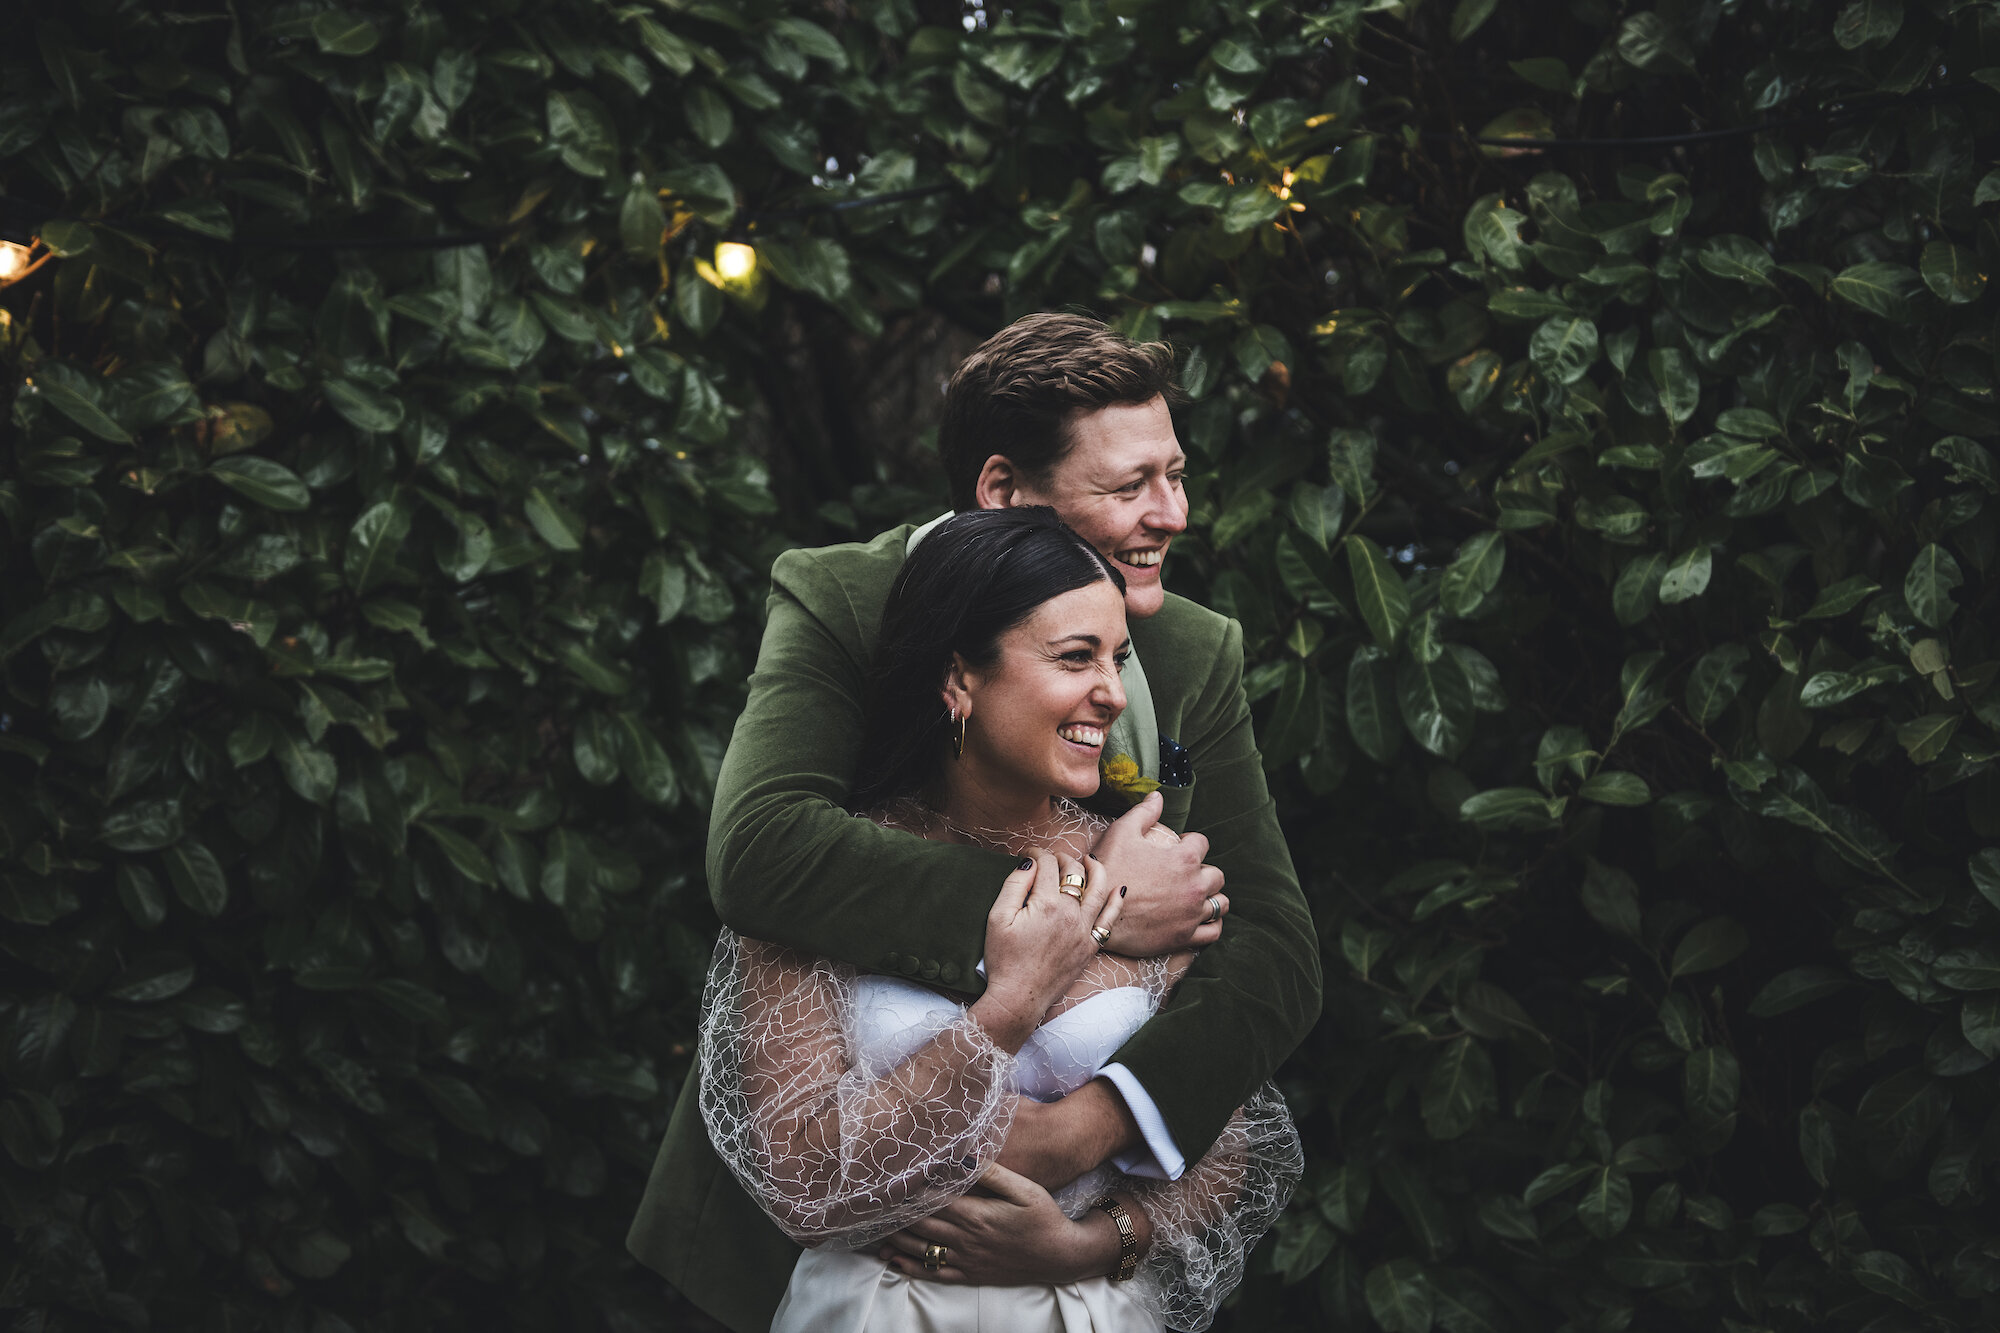 A stunning springtime wedding with Halfpenny London separates and personalised Tilly Thomas Lux hairclip